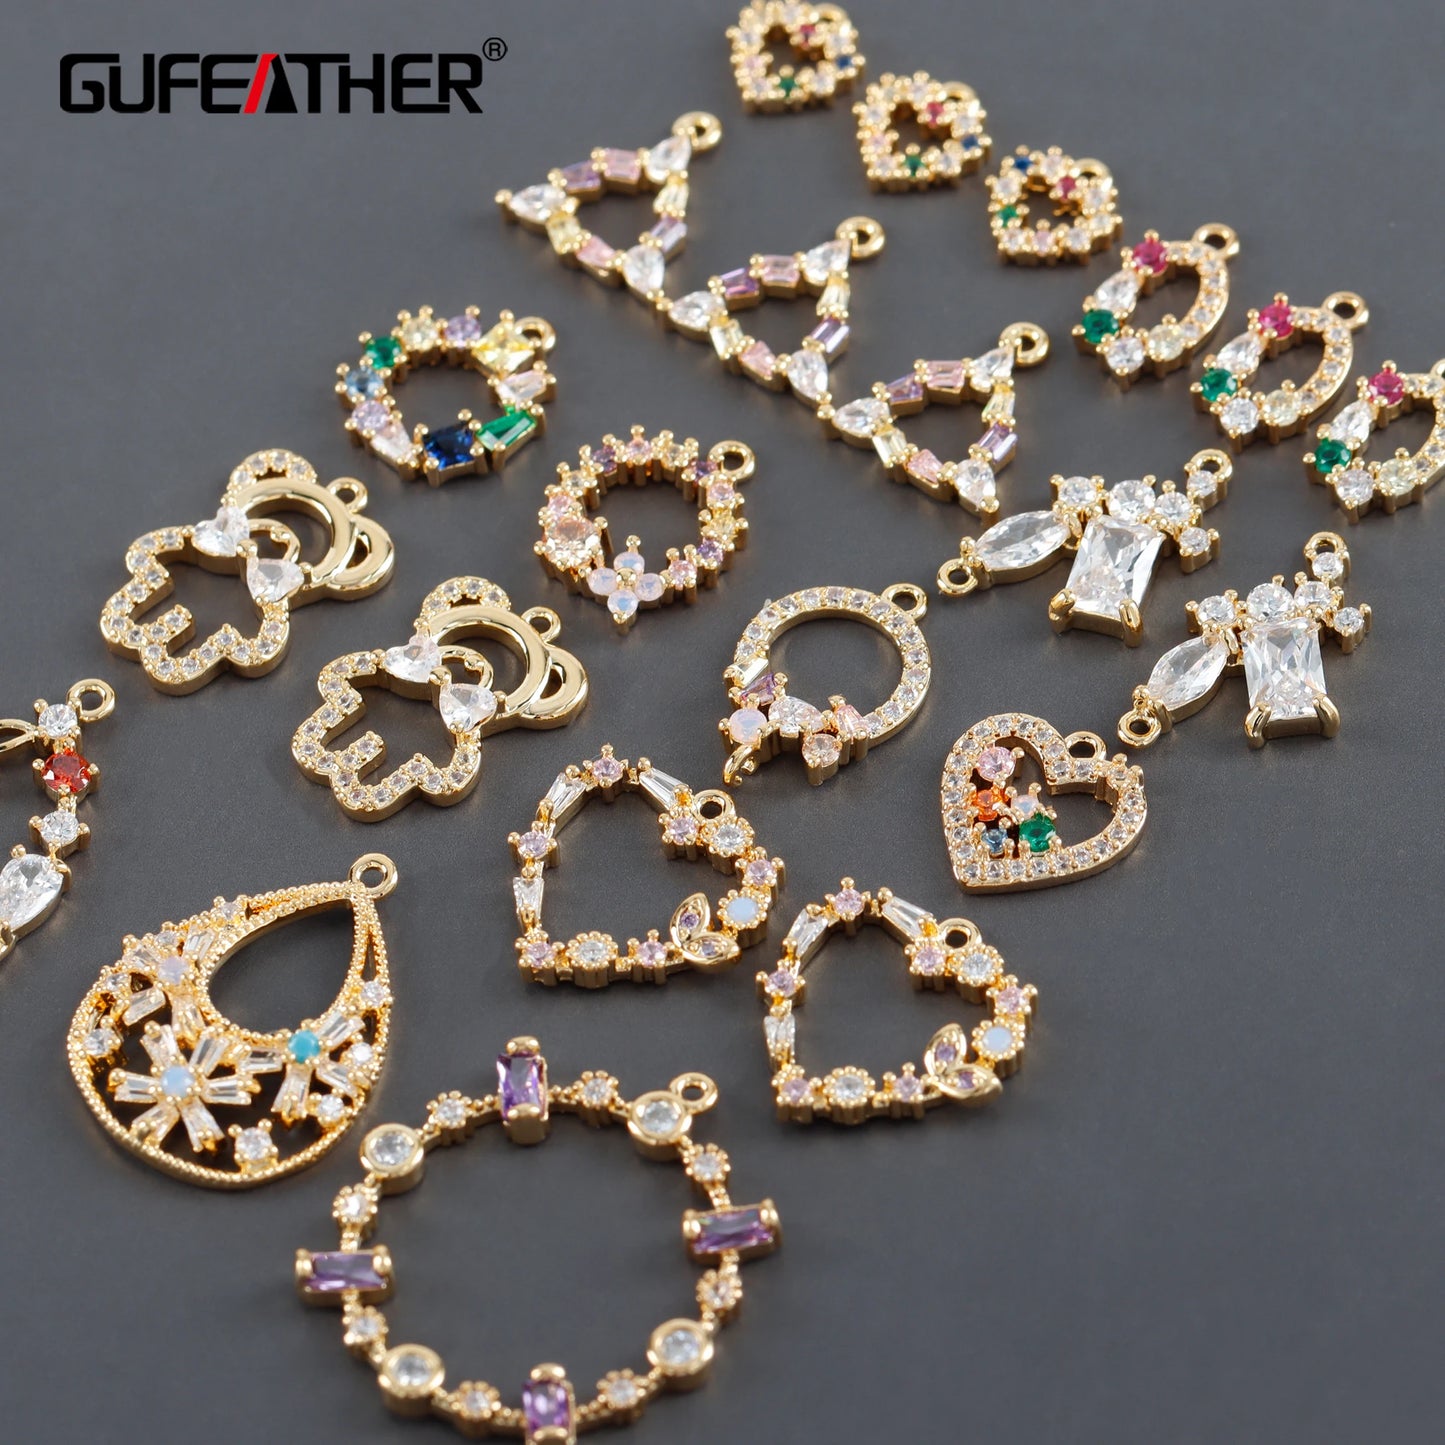 GUFEATHER M1020,jewelry accessories,pass REACH,nickel free,18k gold plated,copper,zircons,diy pendants,jewelry making,10pcs/lot